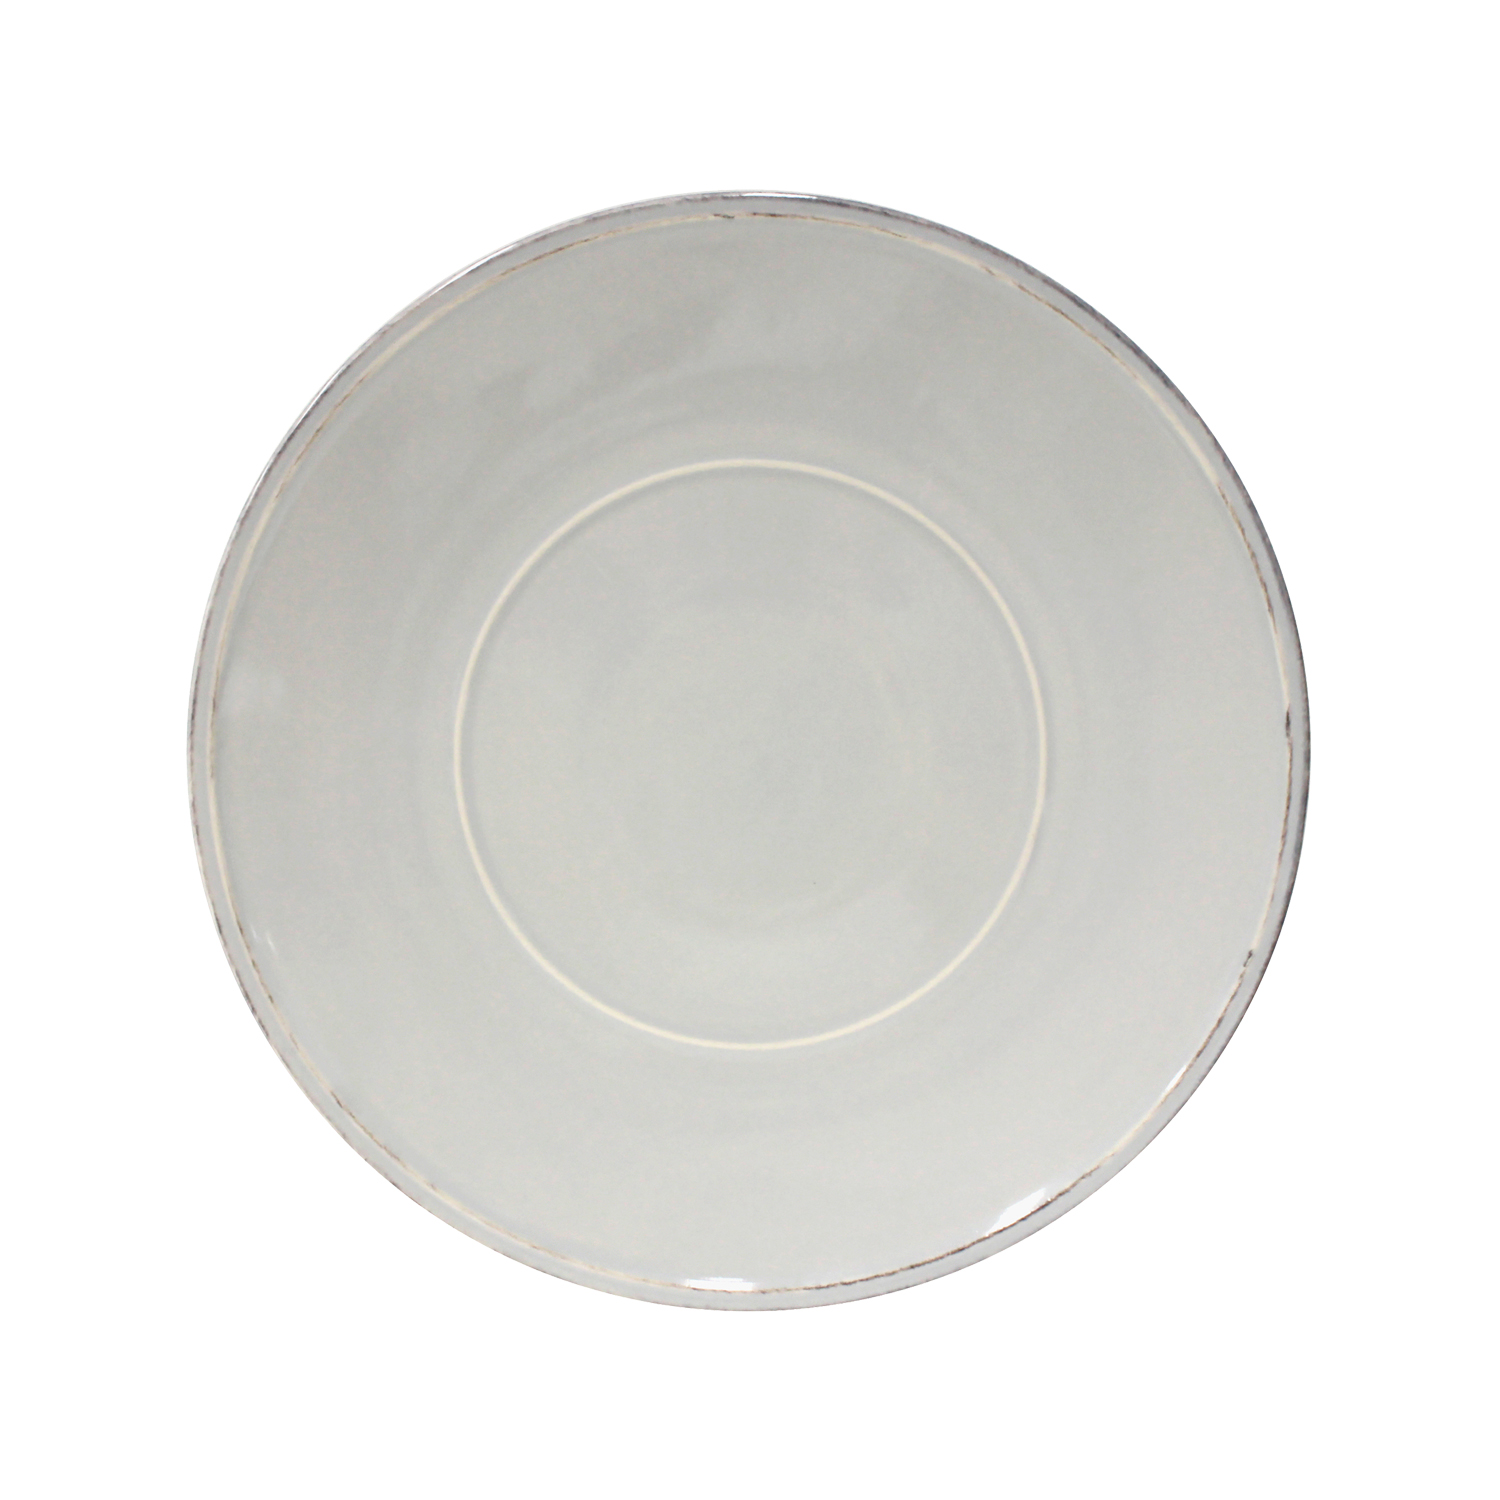 Friso Grey Round Platter/ Charger 34cm Gift